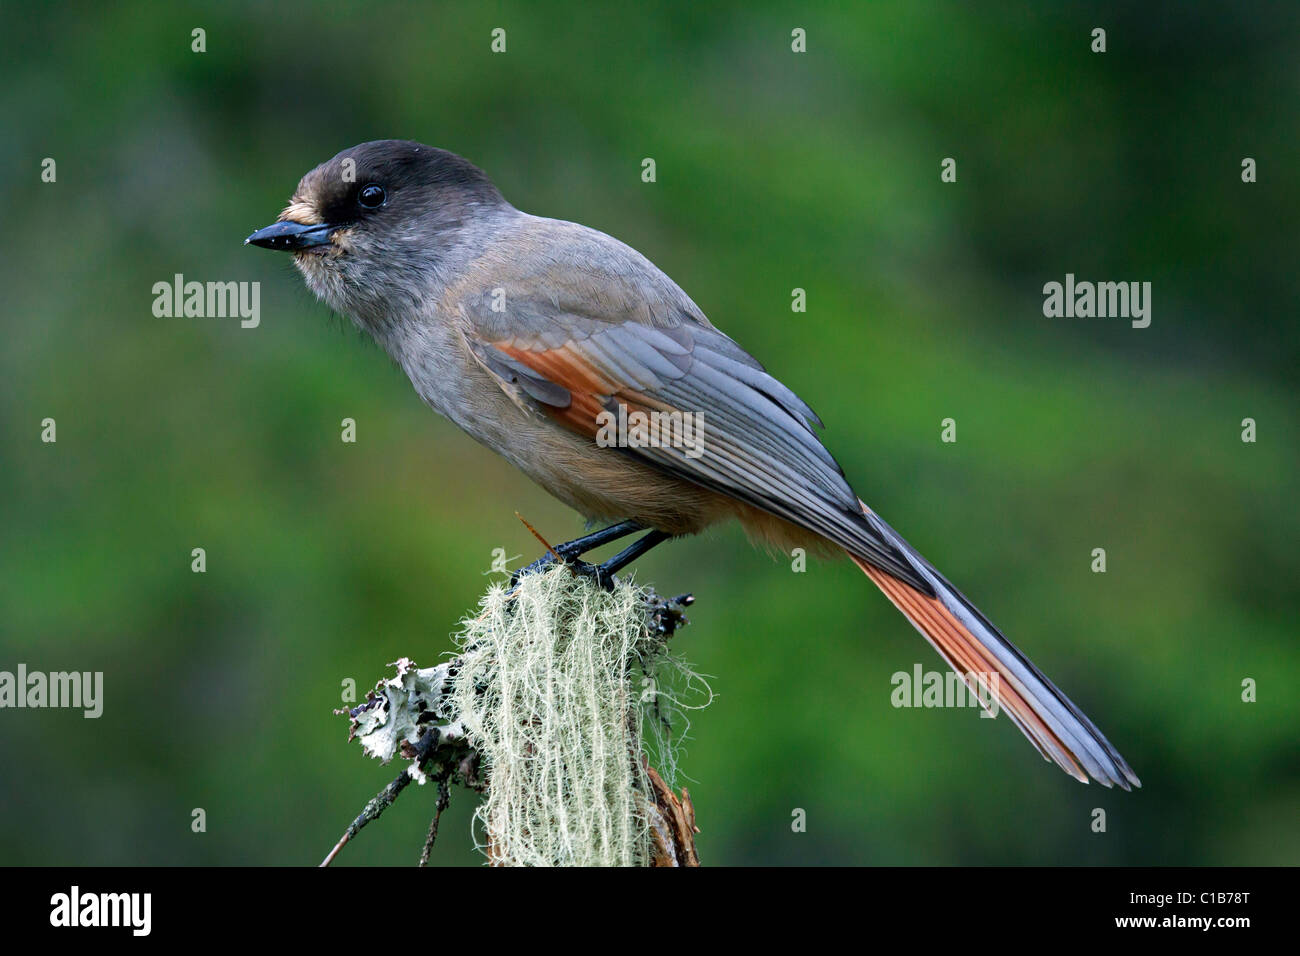 Siberian Jay (Perisoreus infaustus) perched on branch covered in lichen, Sweden Stock Photo